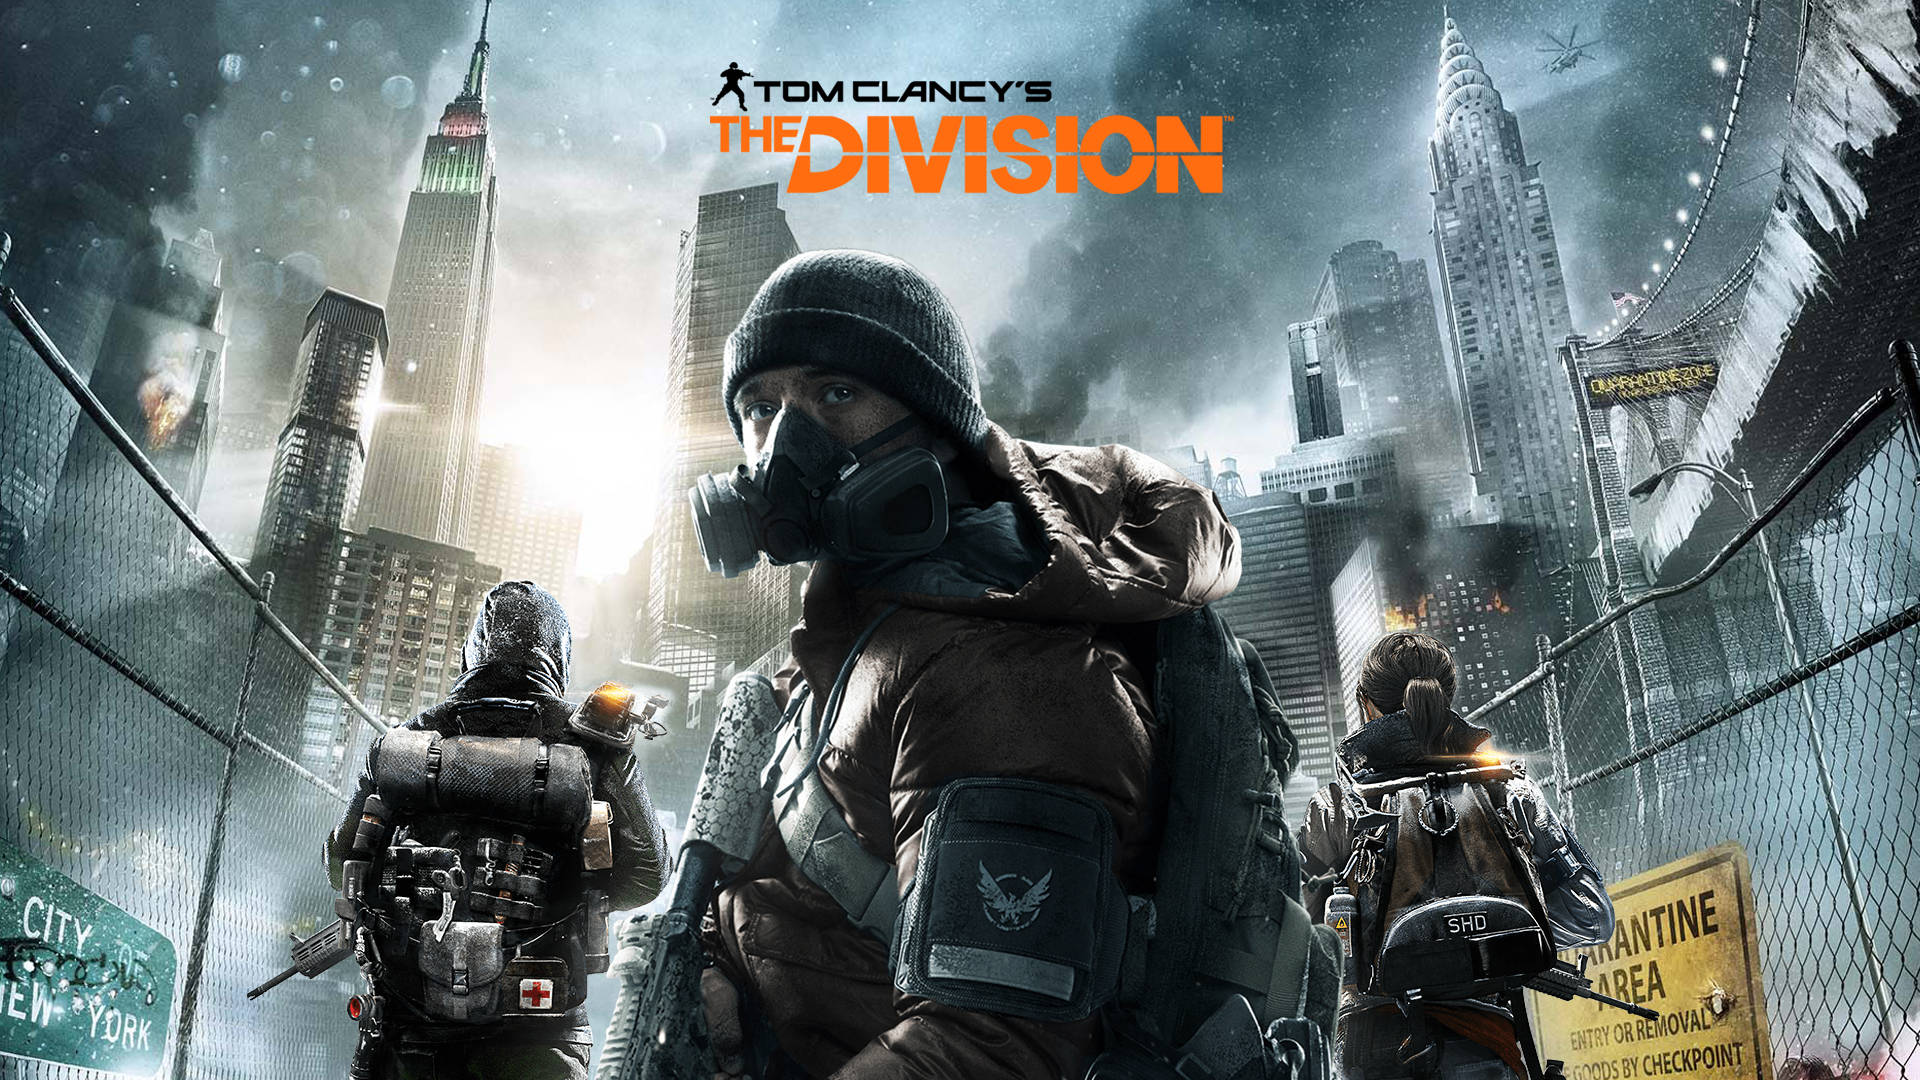 The Division Game Poster Design Background